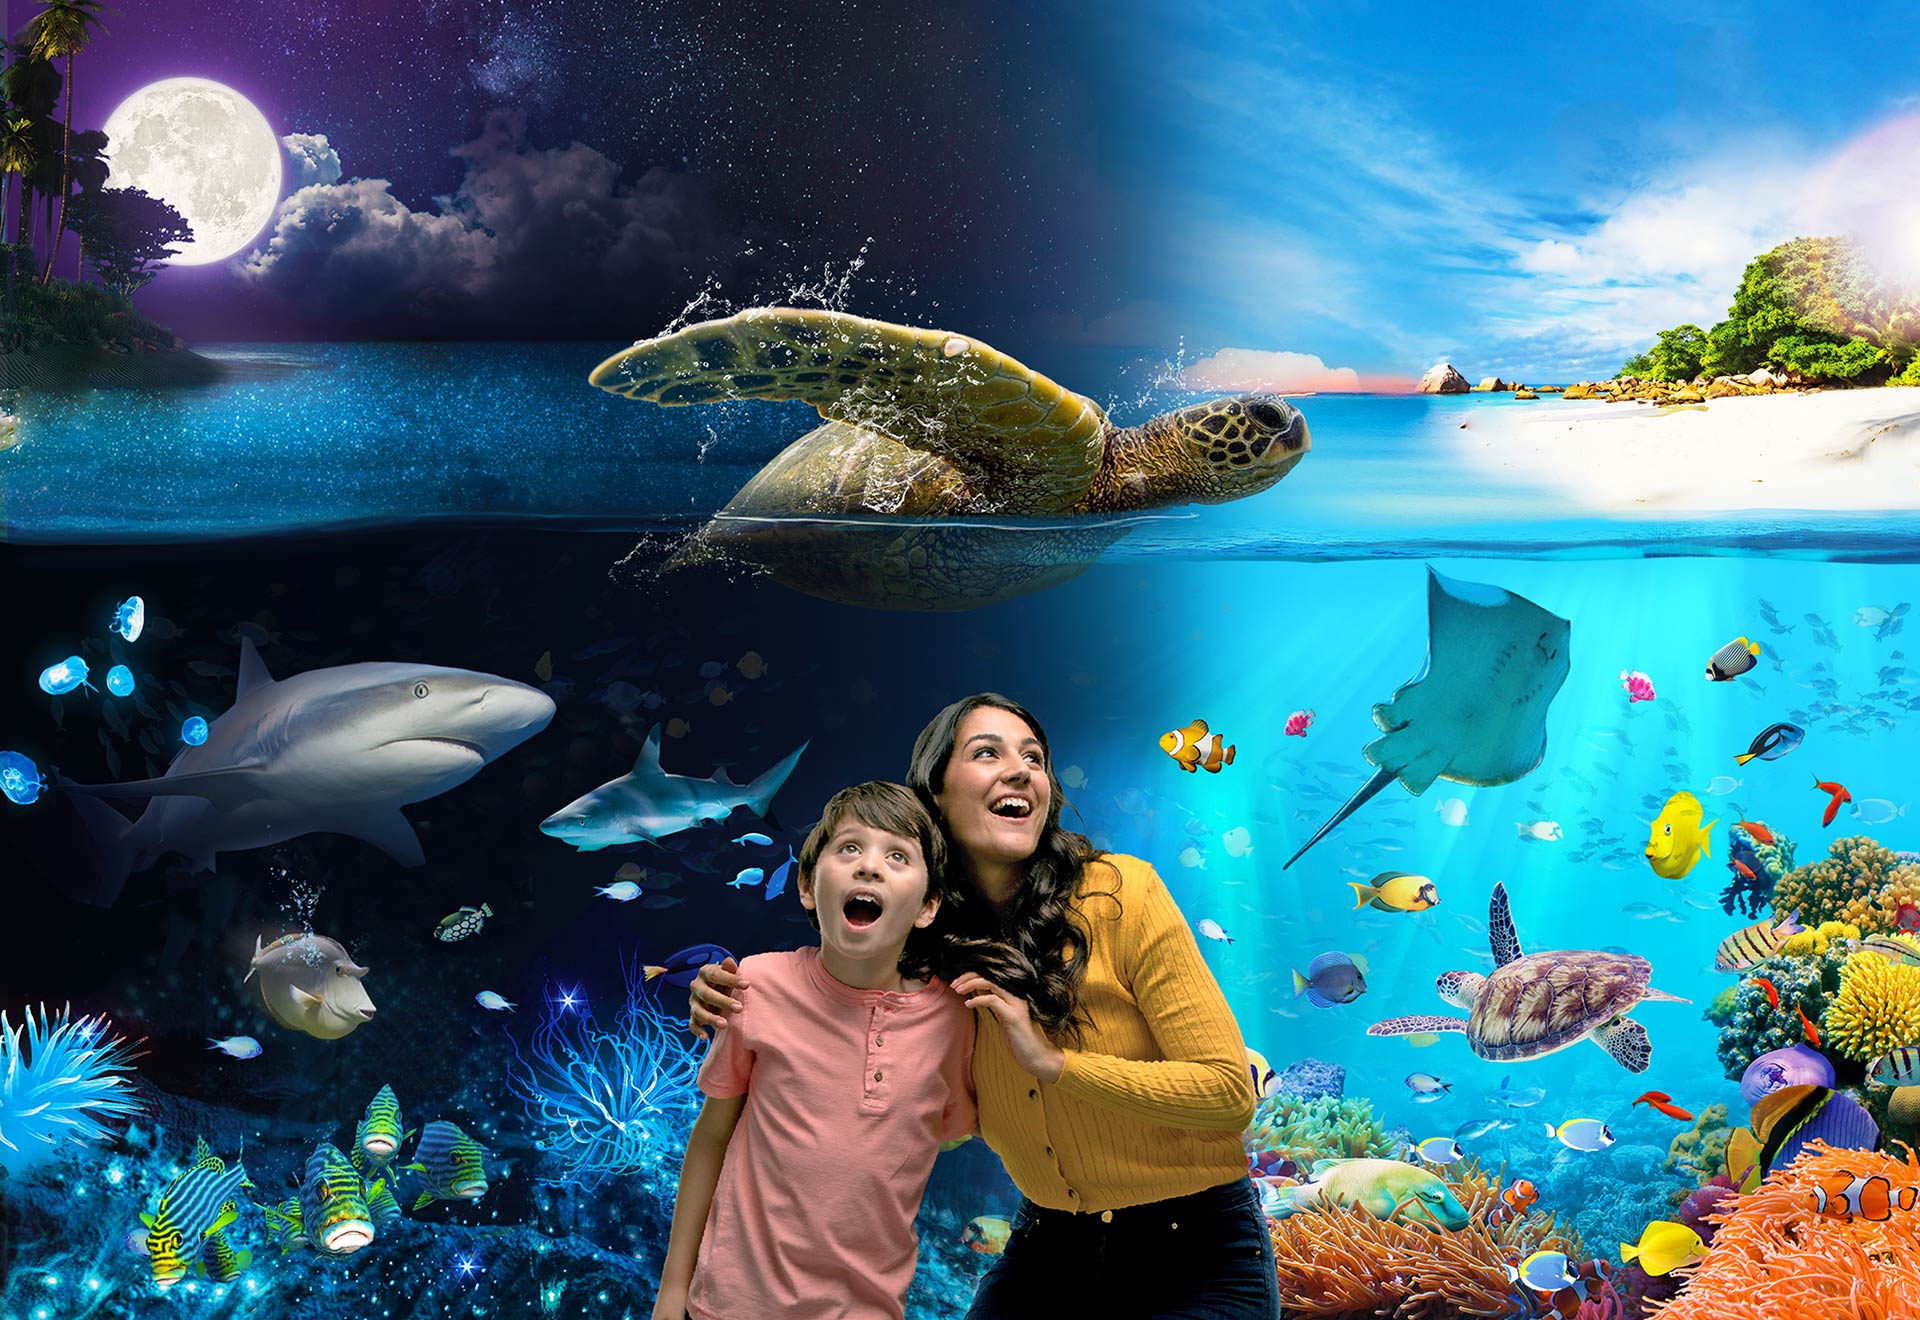 Discover our ocean by night and day at SEA LIFE Weymouth